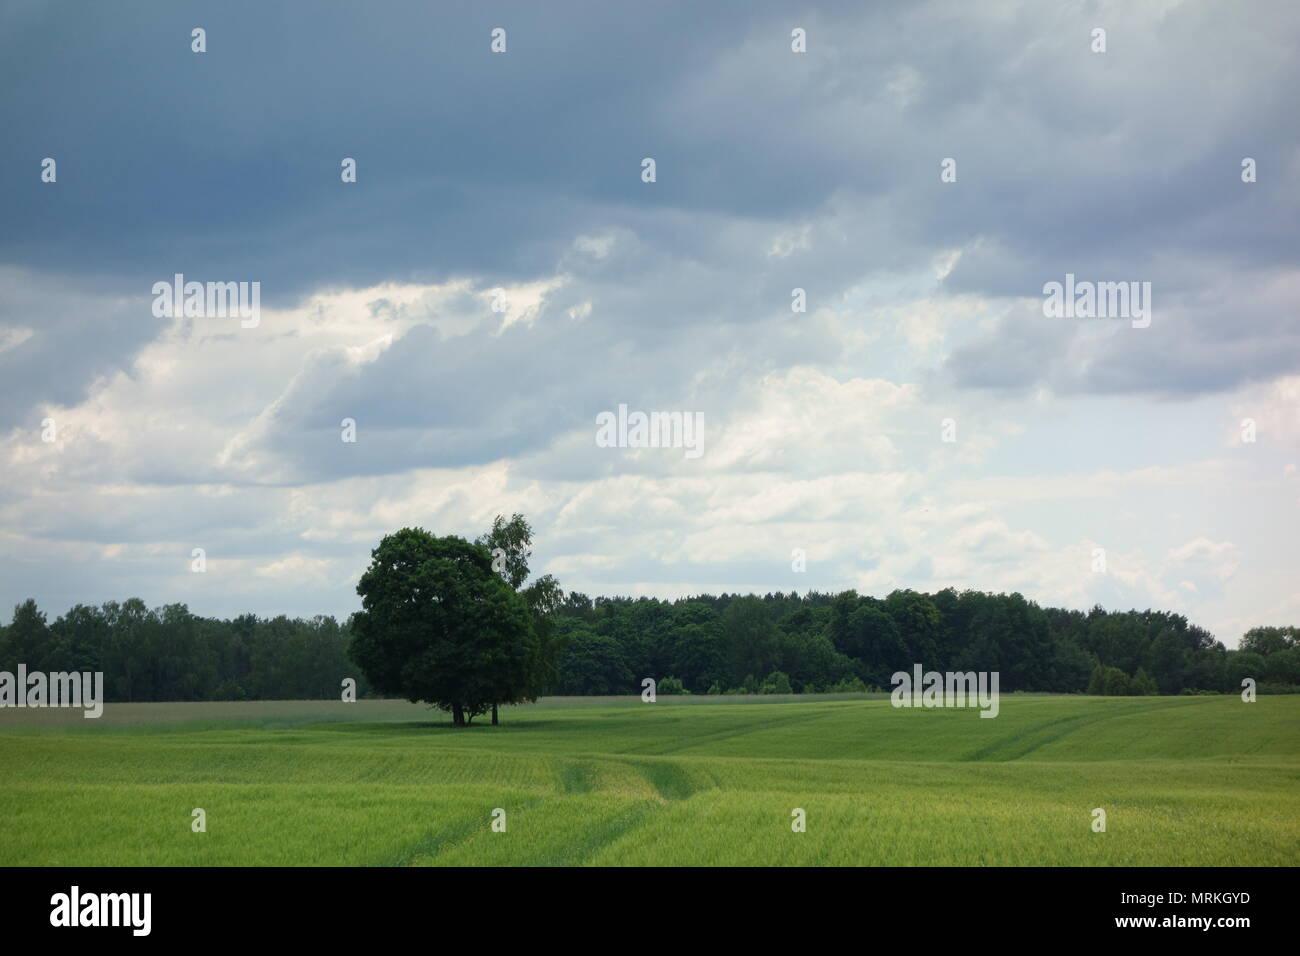 Field landscape with trees against a stormy sky Stock Photo